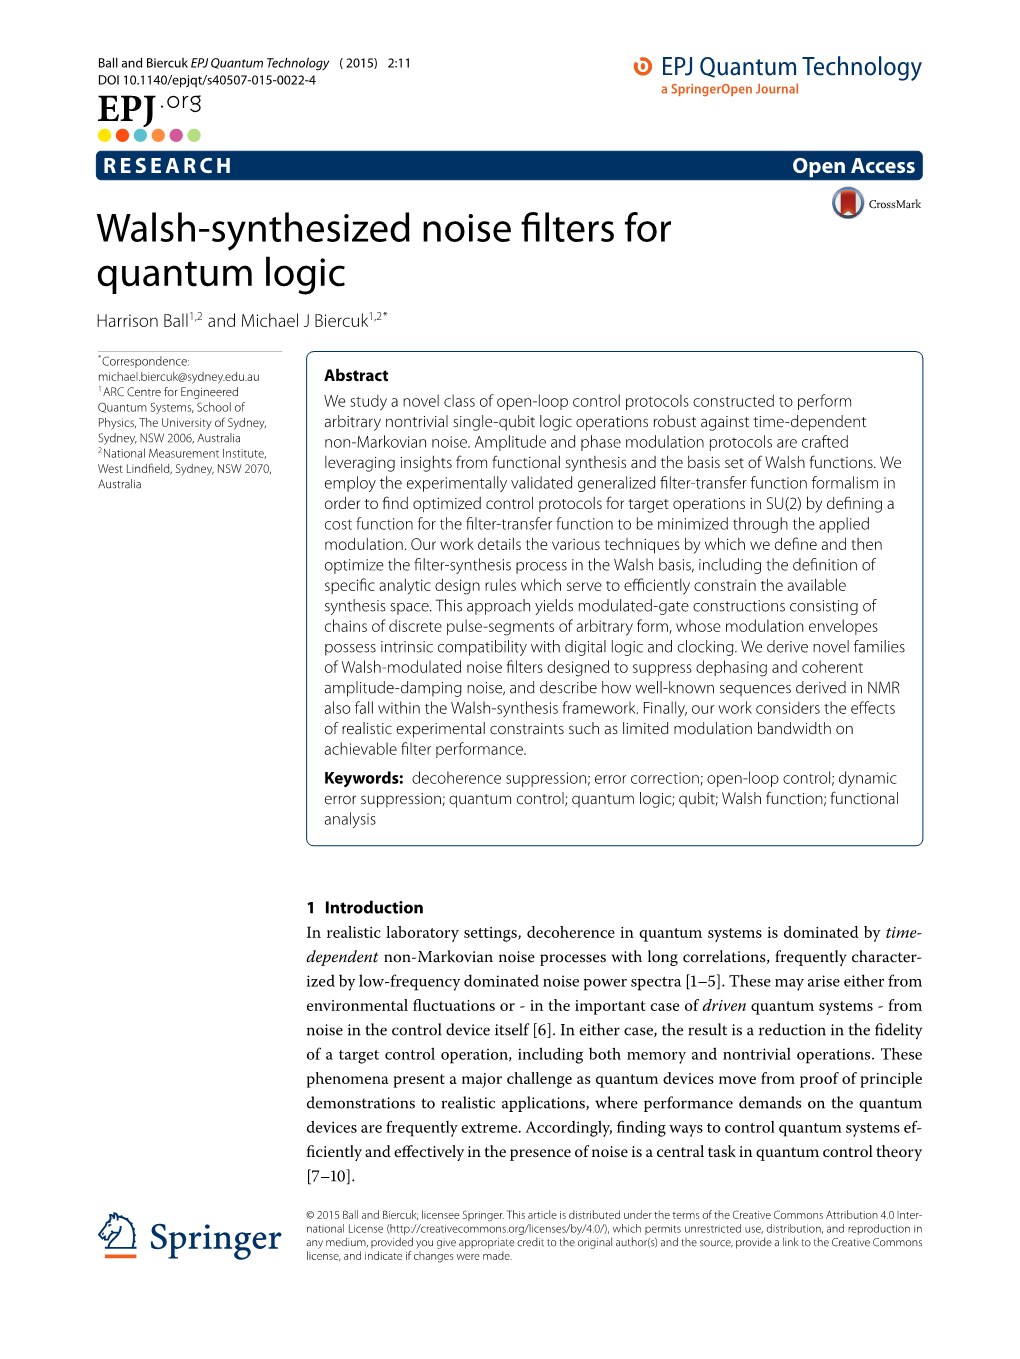 Walsh-Synthesized Noise Filters for Quantum Logic